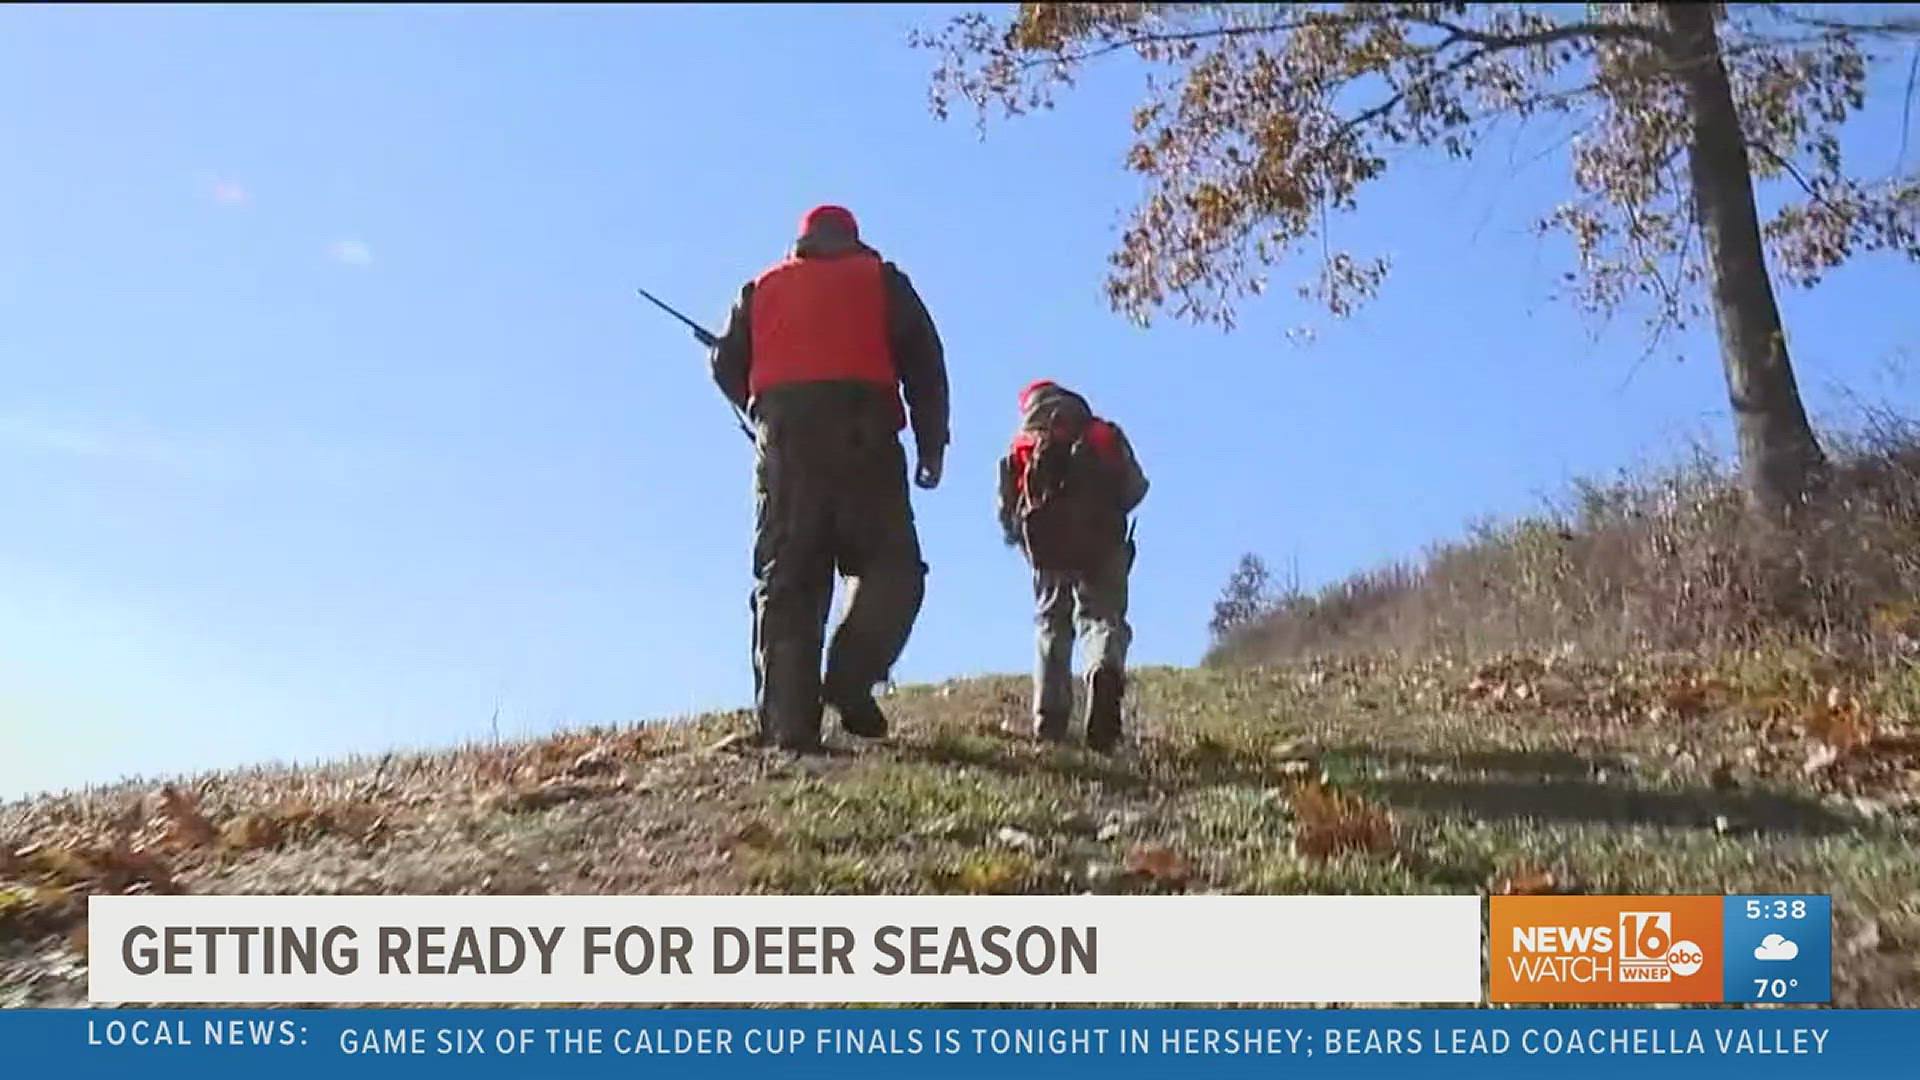 Deer licenses for certain parts of the state were made available on Monday.